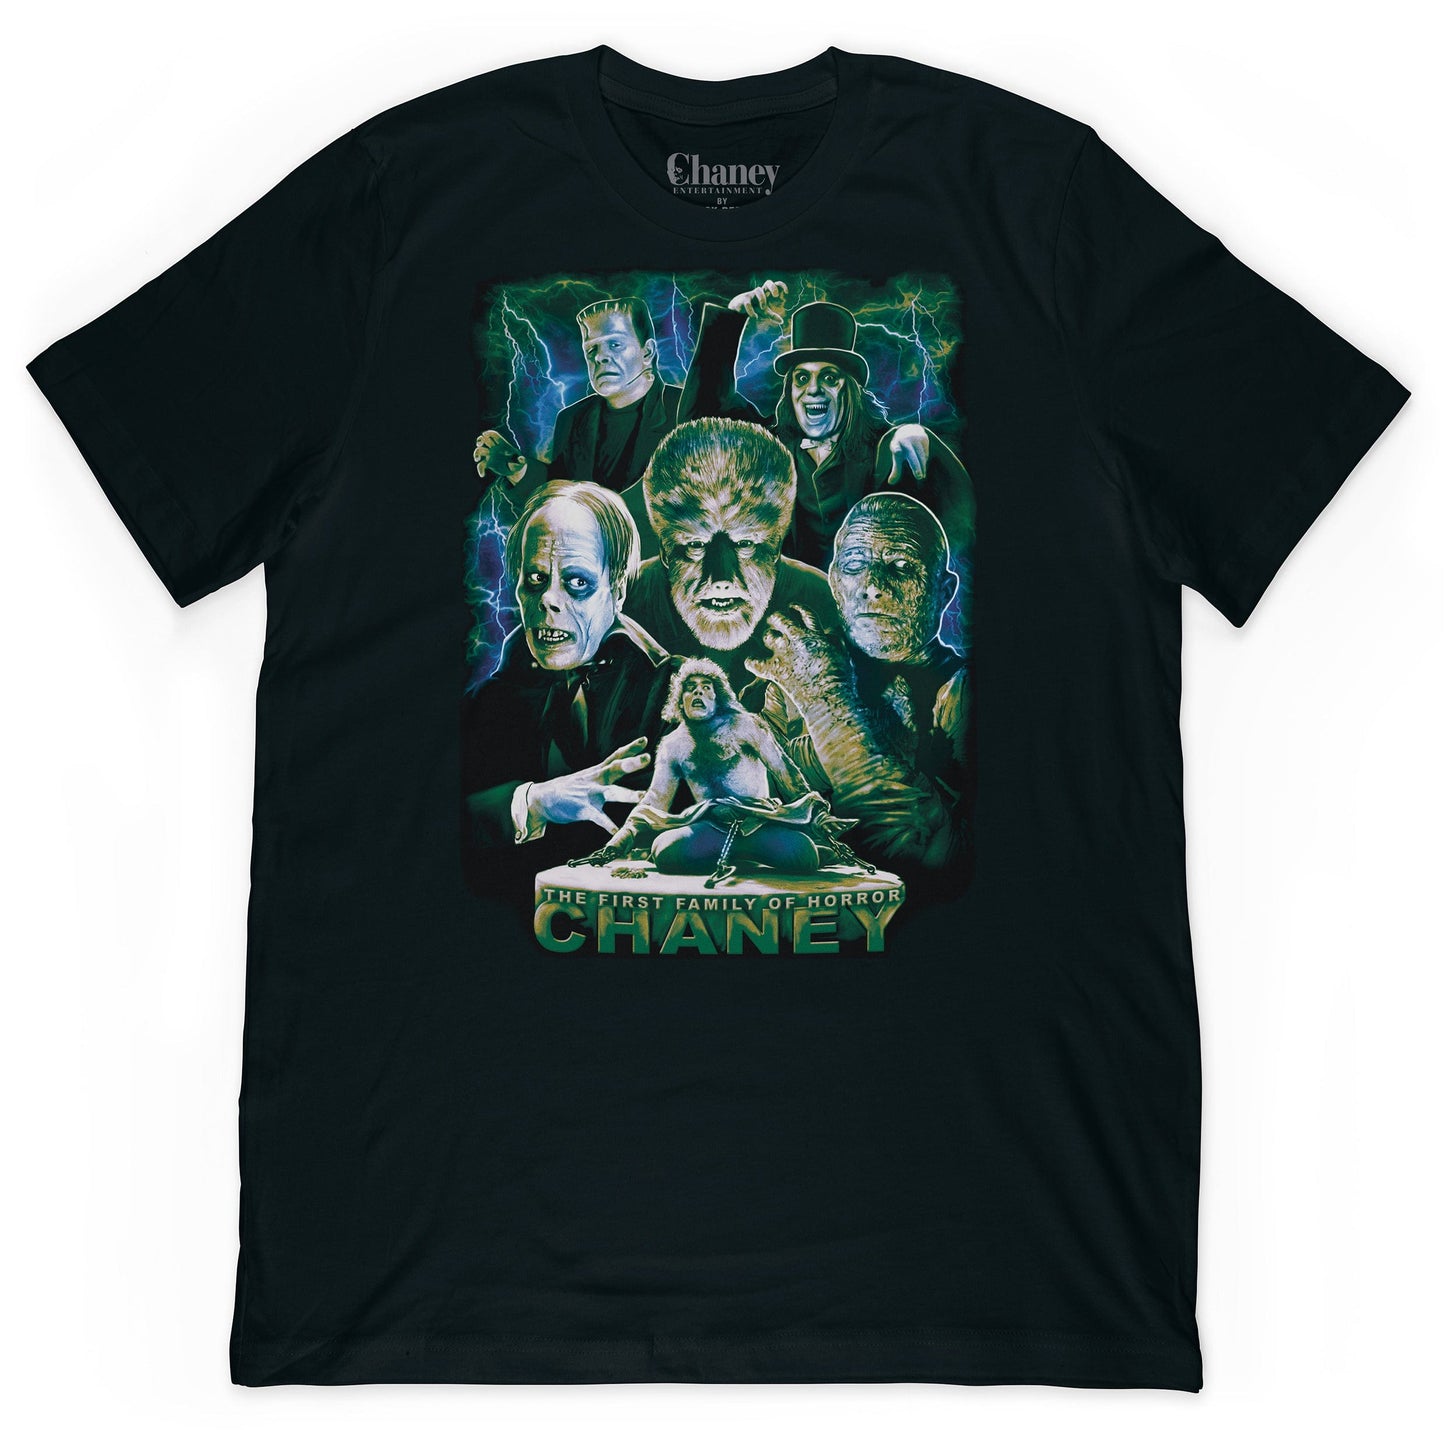 Chaney - The First Family of Horror Tee